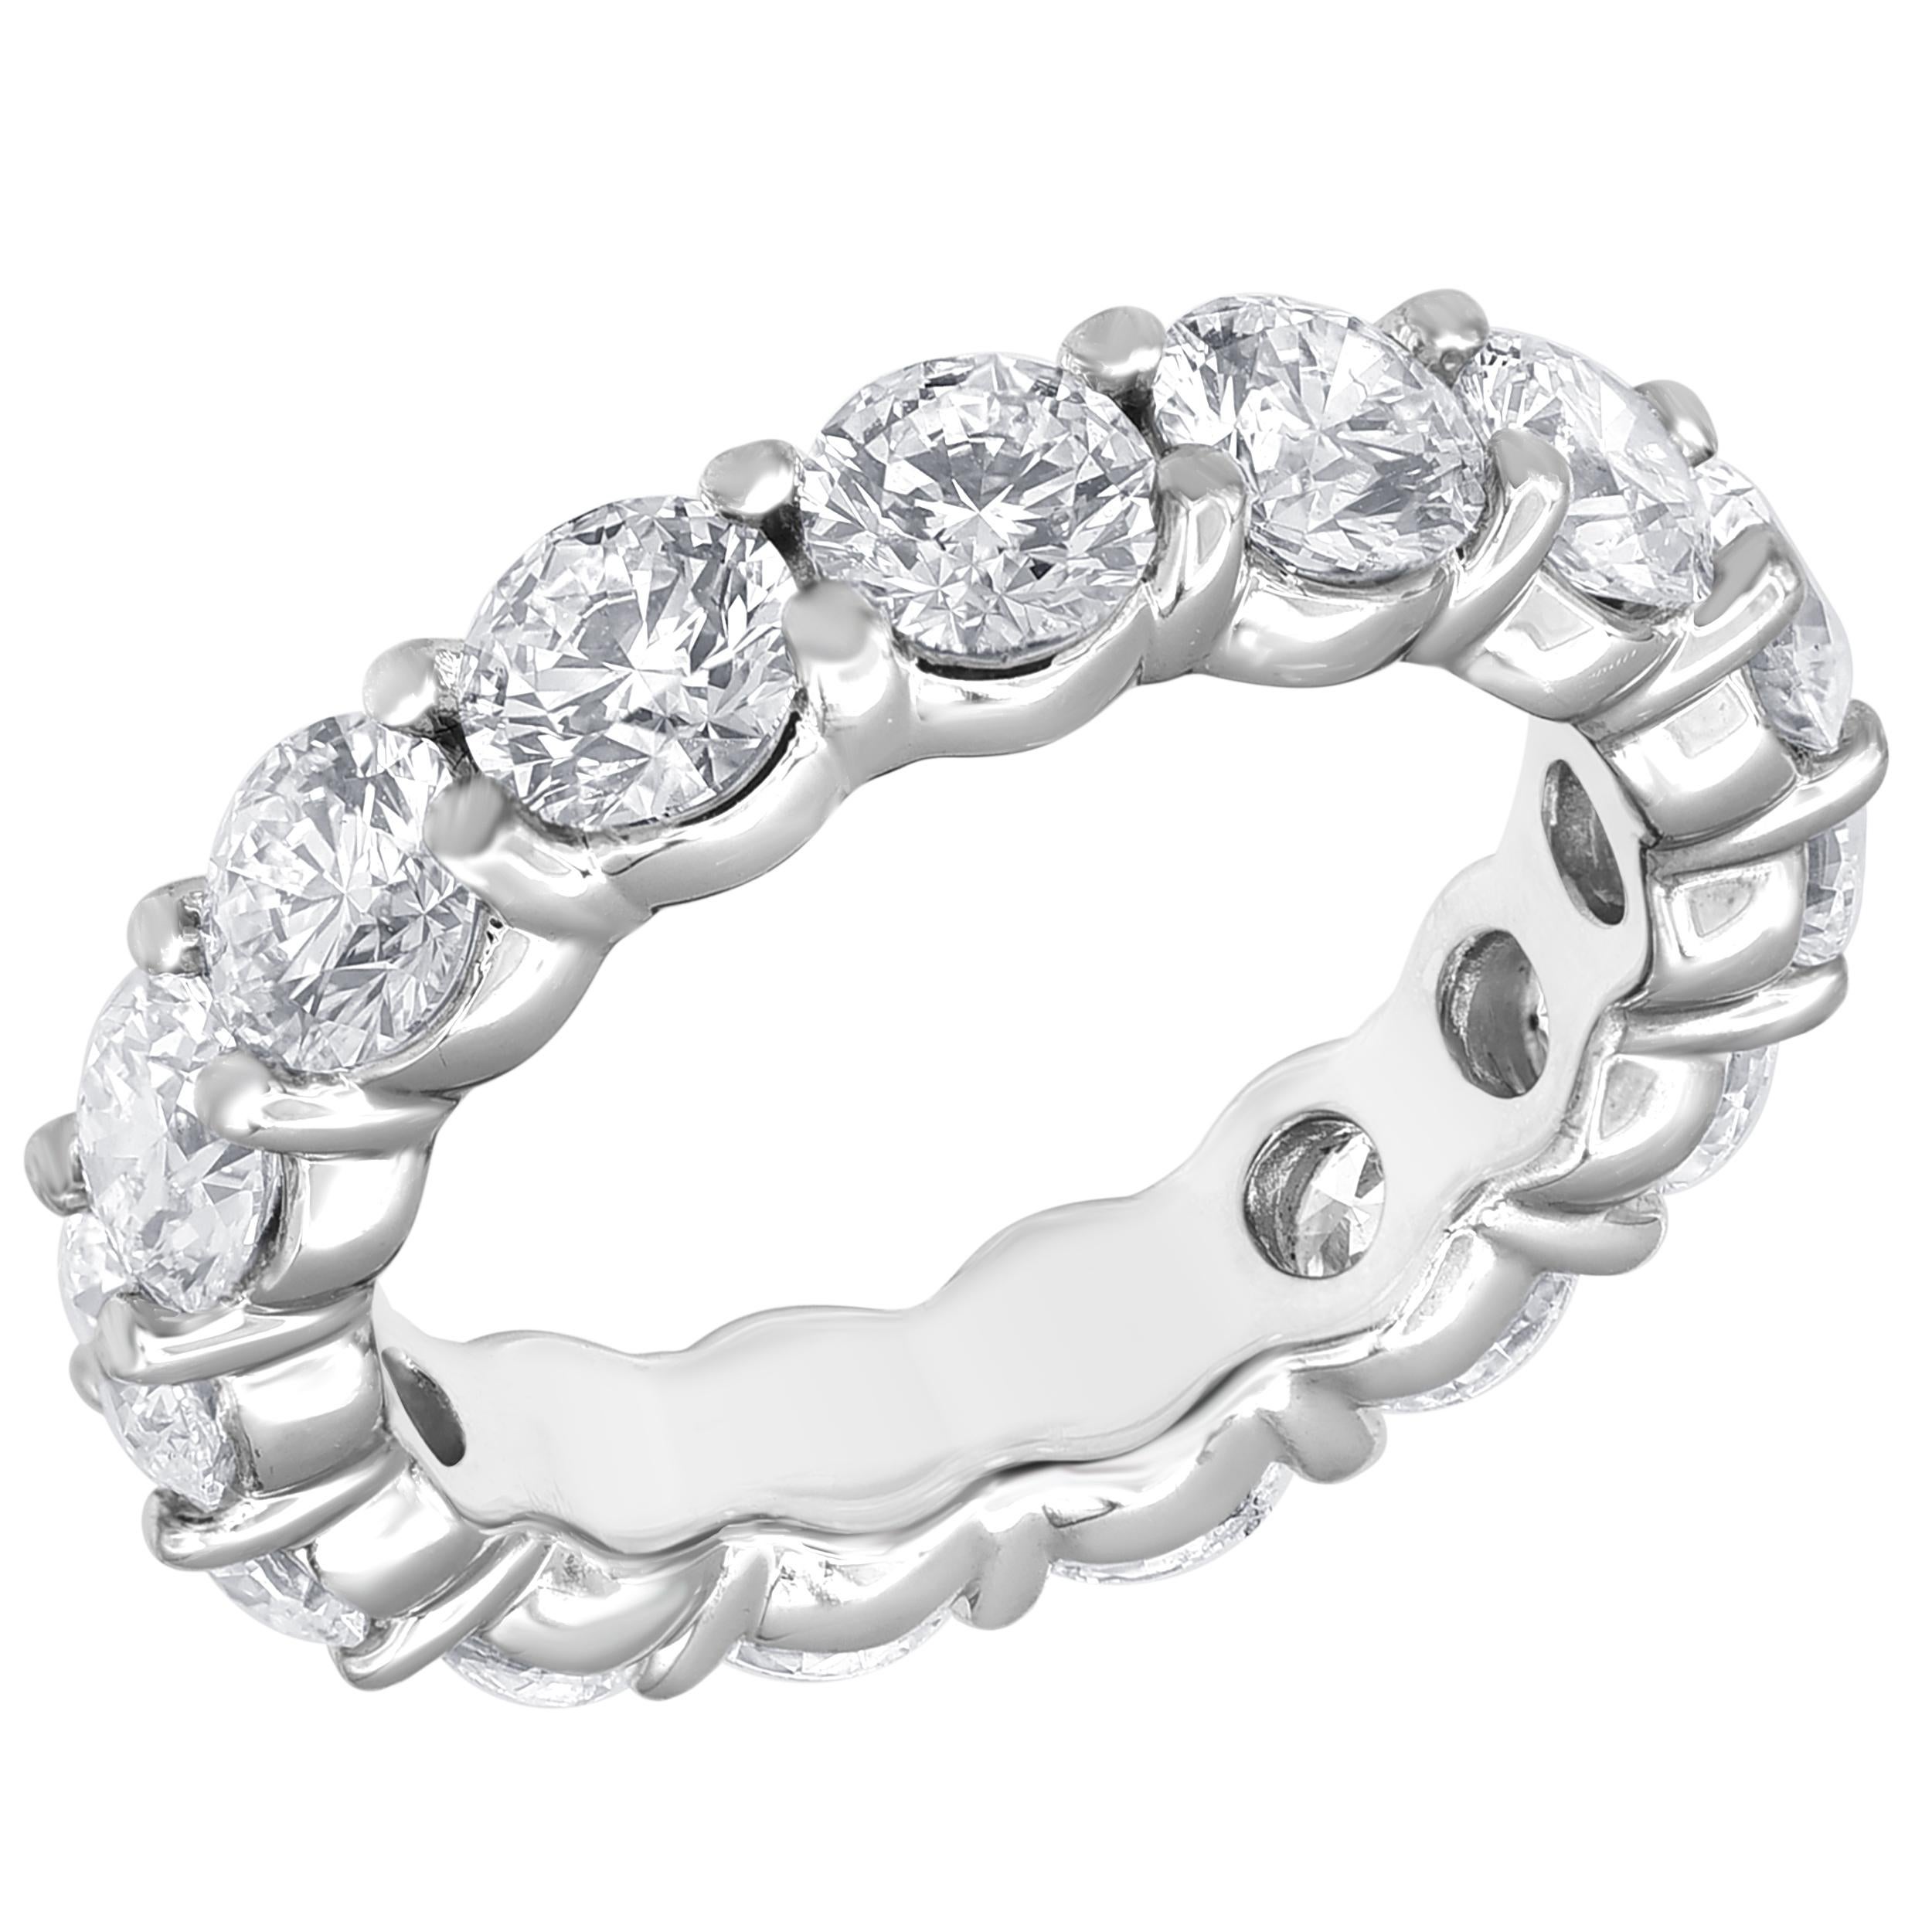 Celebrate your everlasting love story with a diamond eternity band. Stunning as a wedding or anniversary band, Fashioned in sleek and elegant Platinum, glistening round prong-set diamonds totaling 5 cts. with F-VS quality of that completely surround